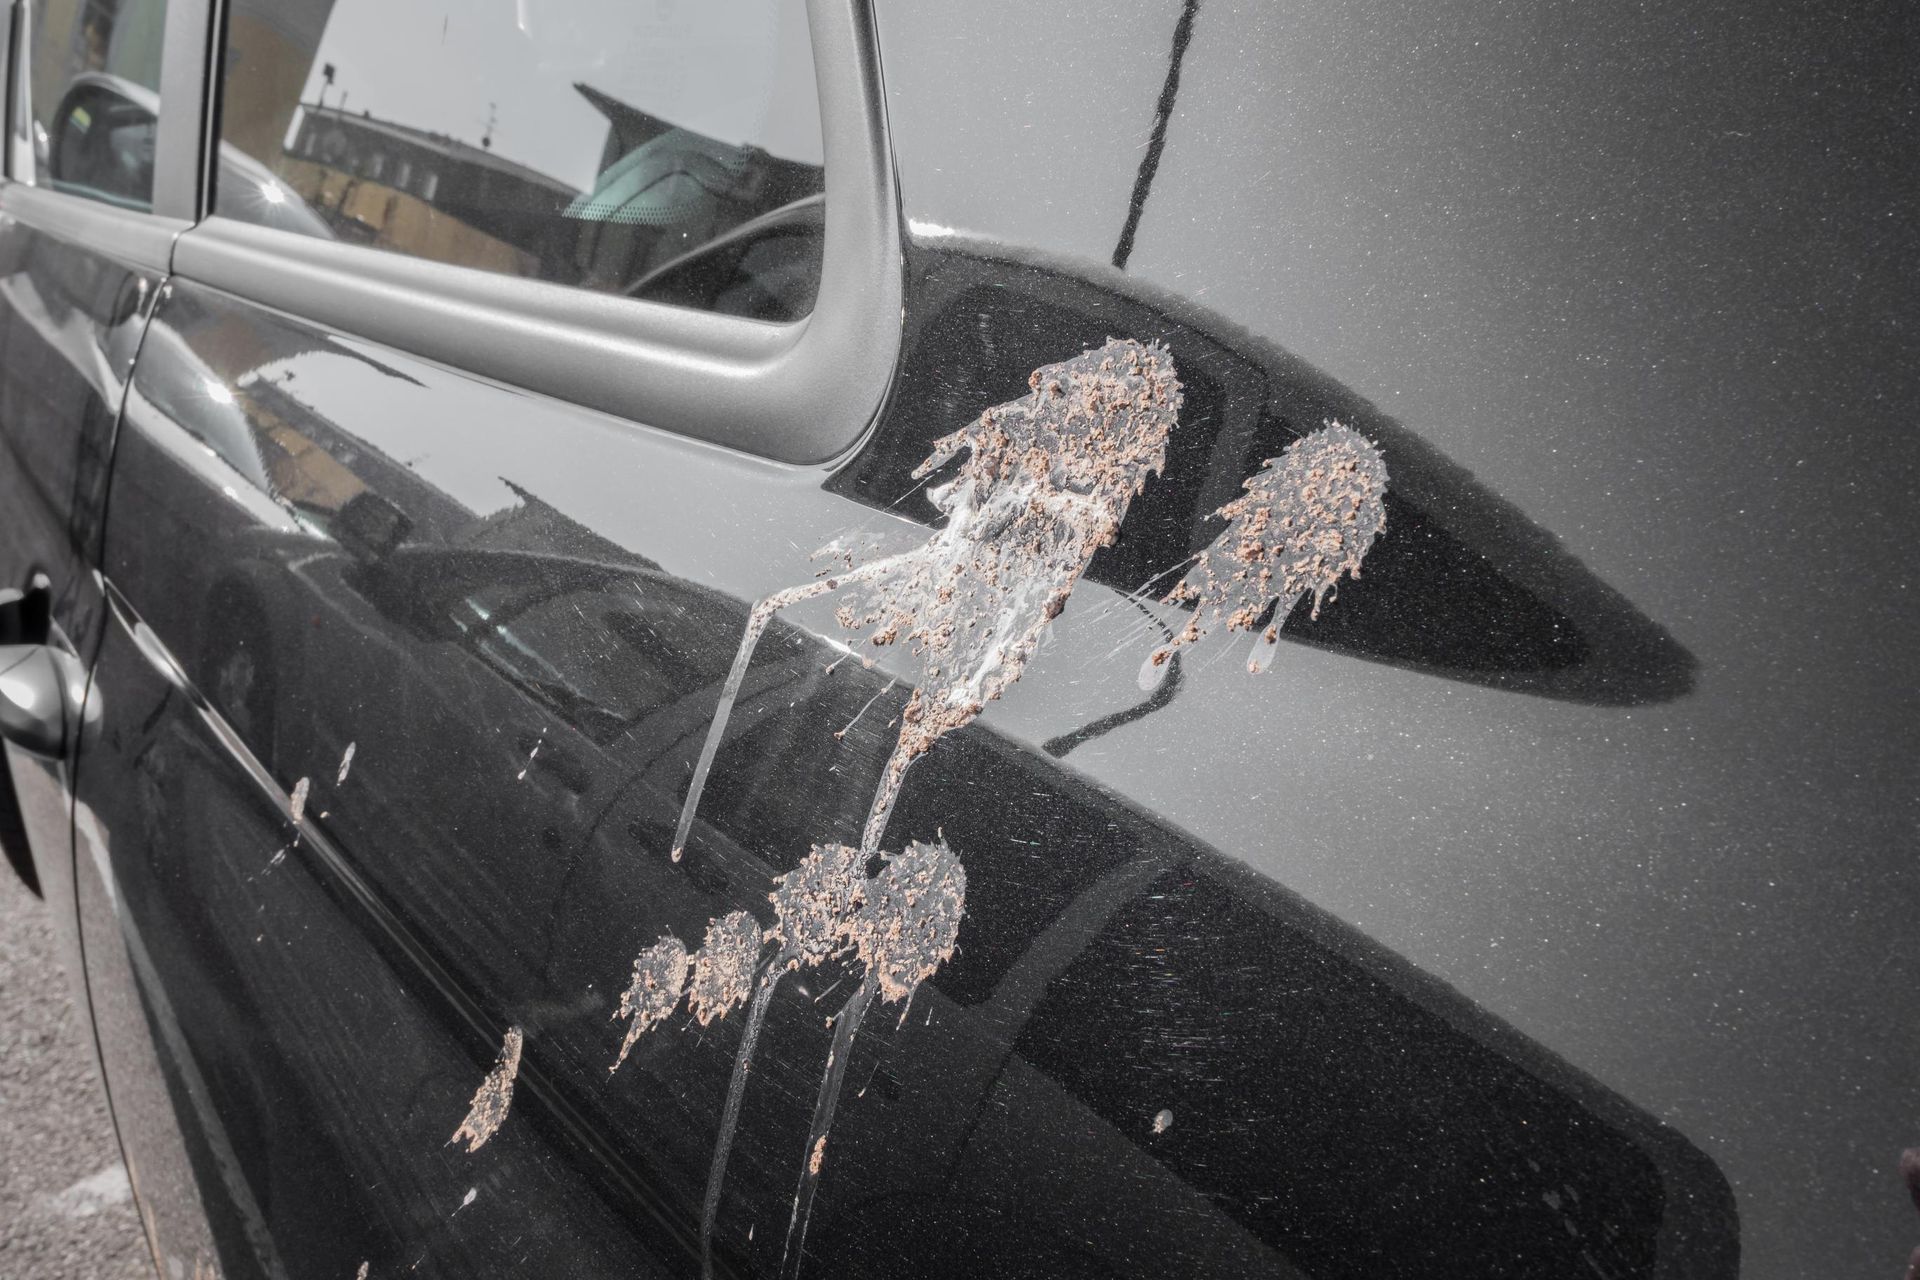 Bird dropping on the side of a black car